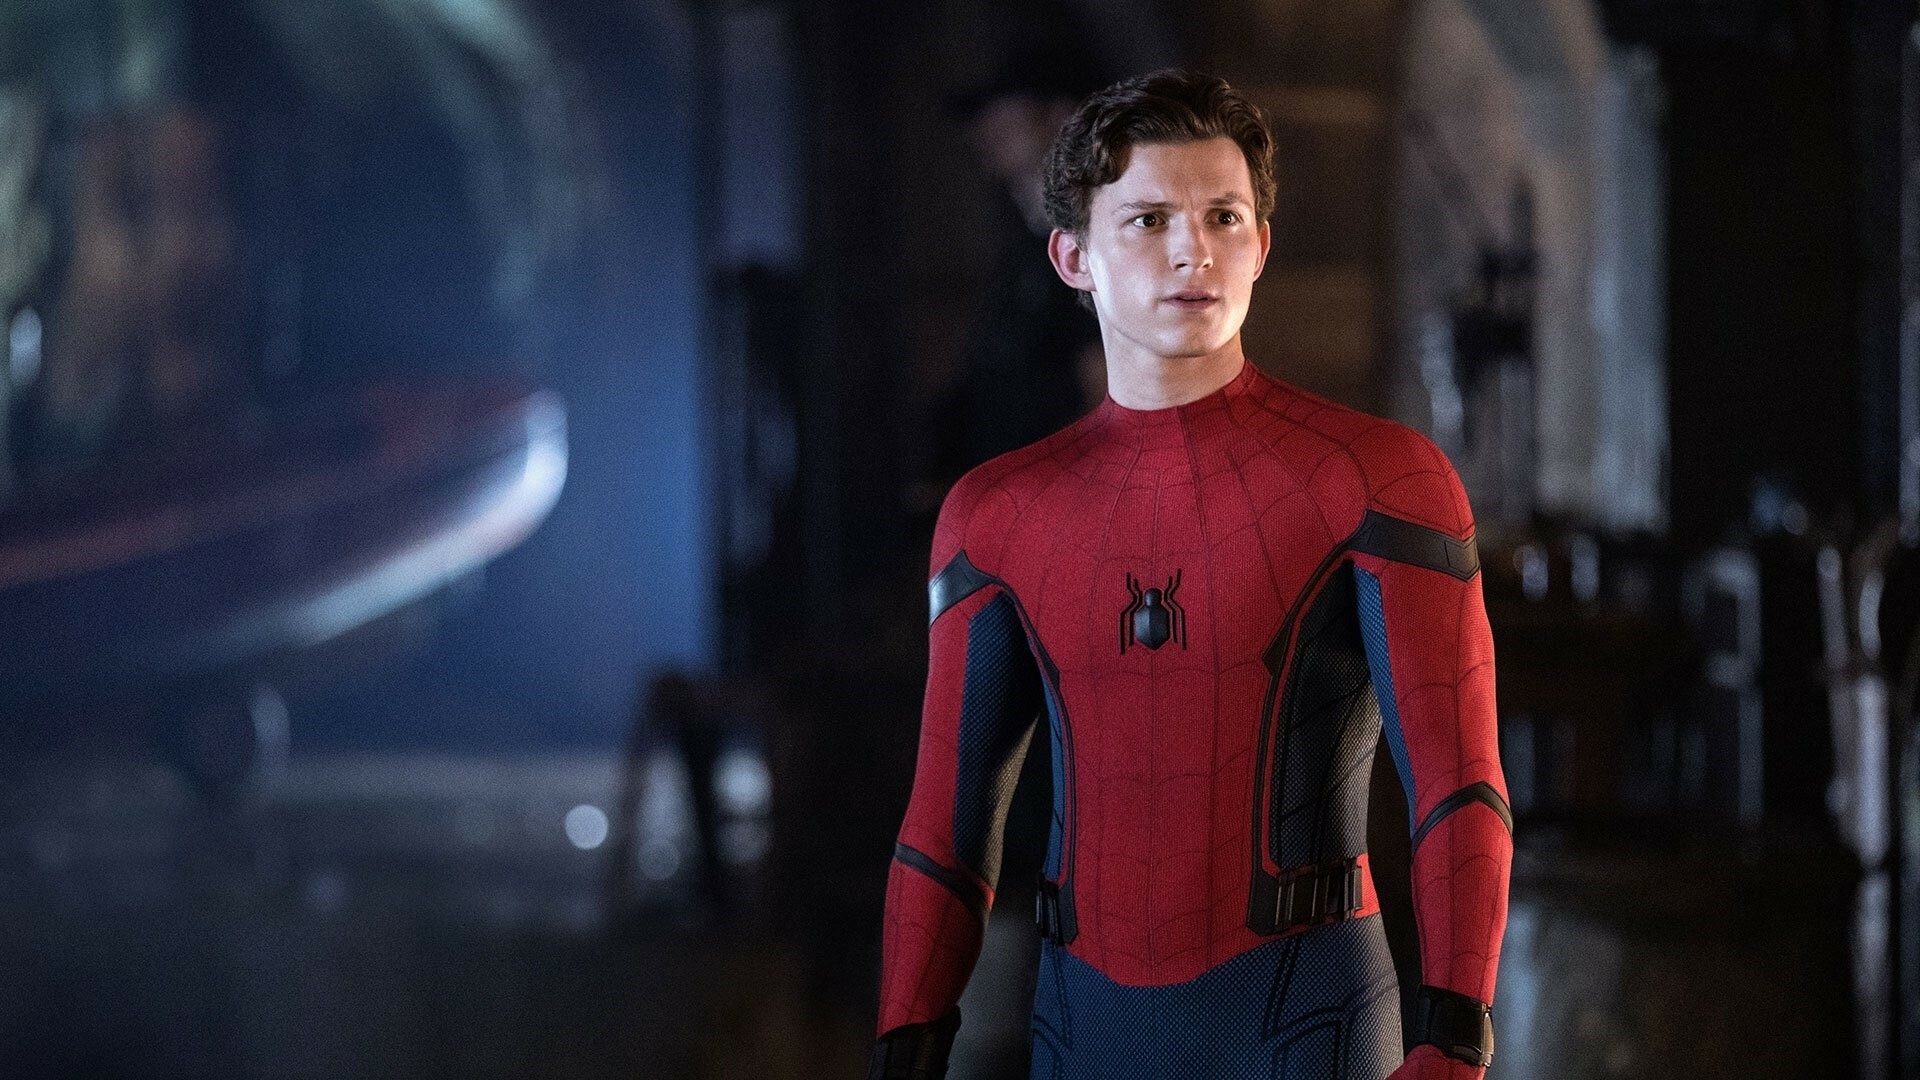 Tom Holland: Reprised his role as Spider-Man in Avengers: Infinity War (2018). 1920x1080 Full HD Wallpaper.